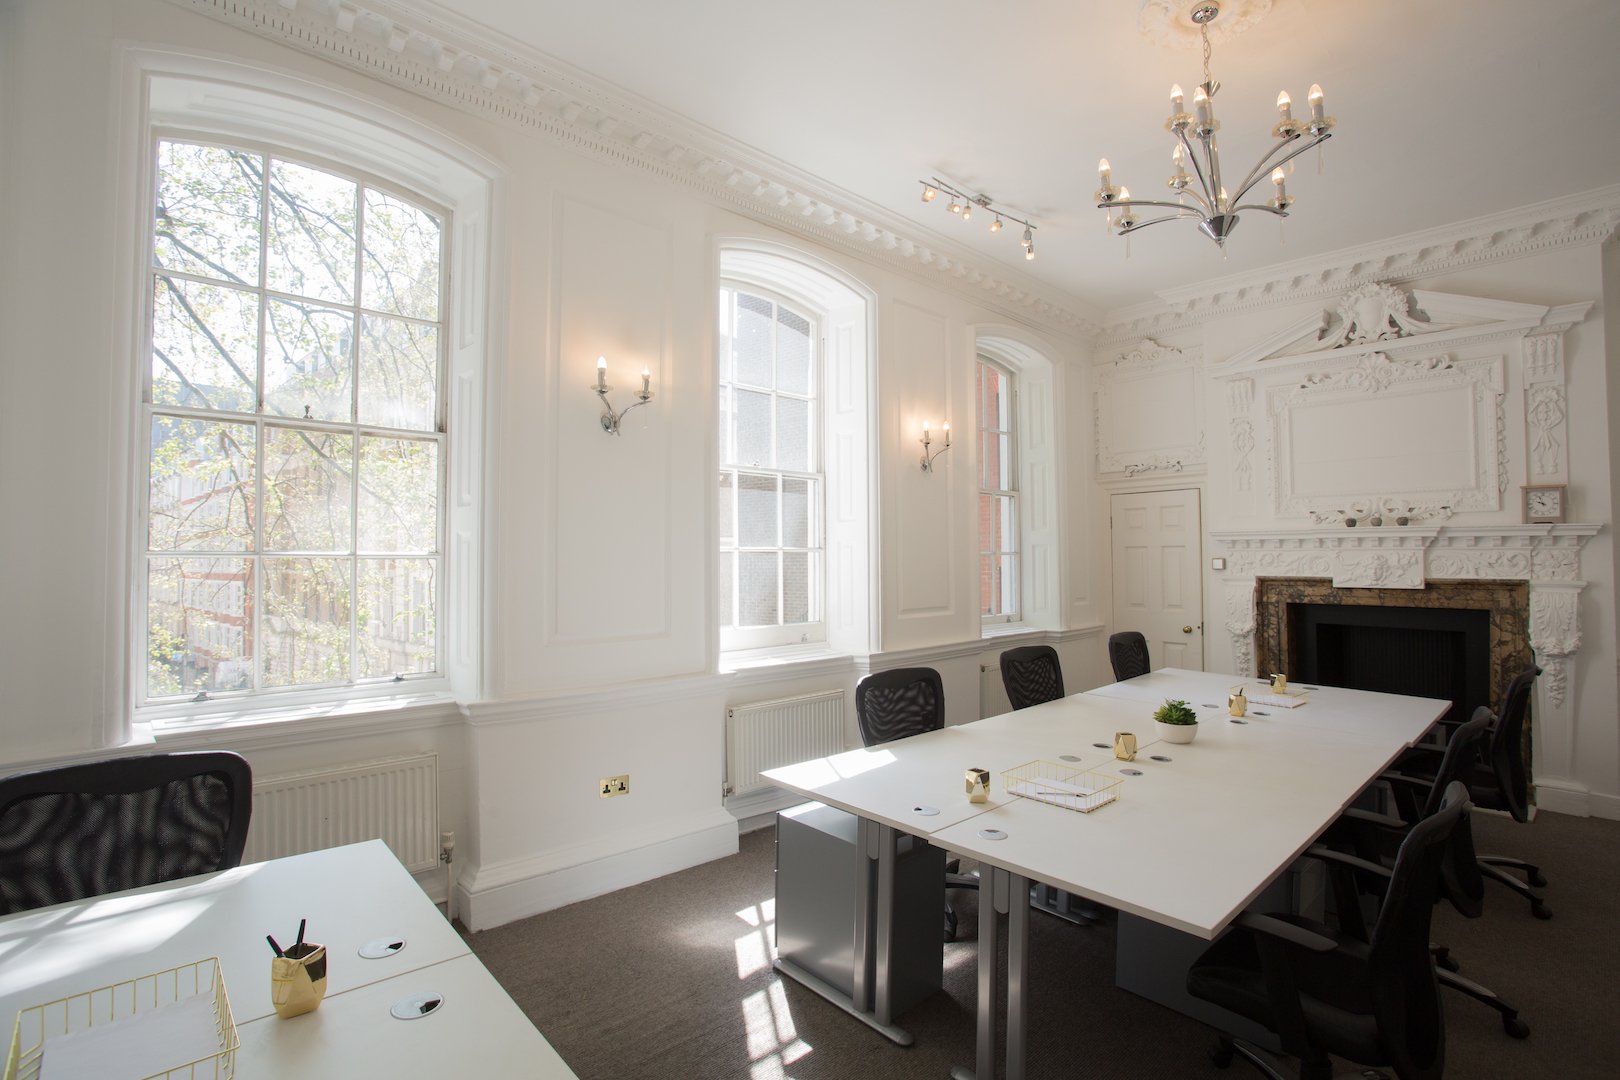 Boutique Workplace- Cannon Street beltere